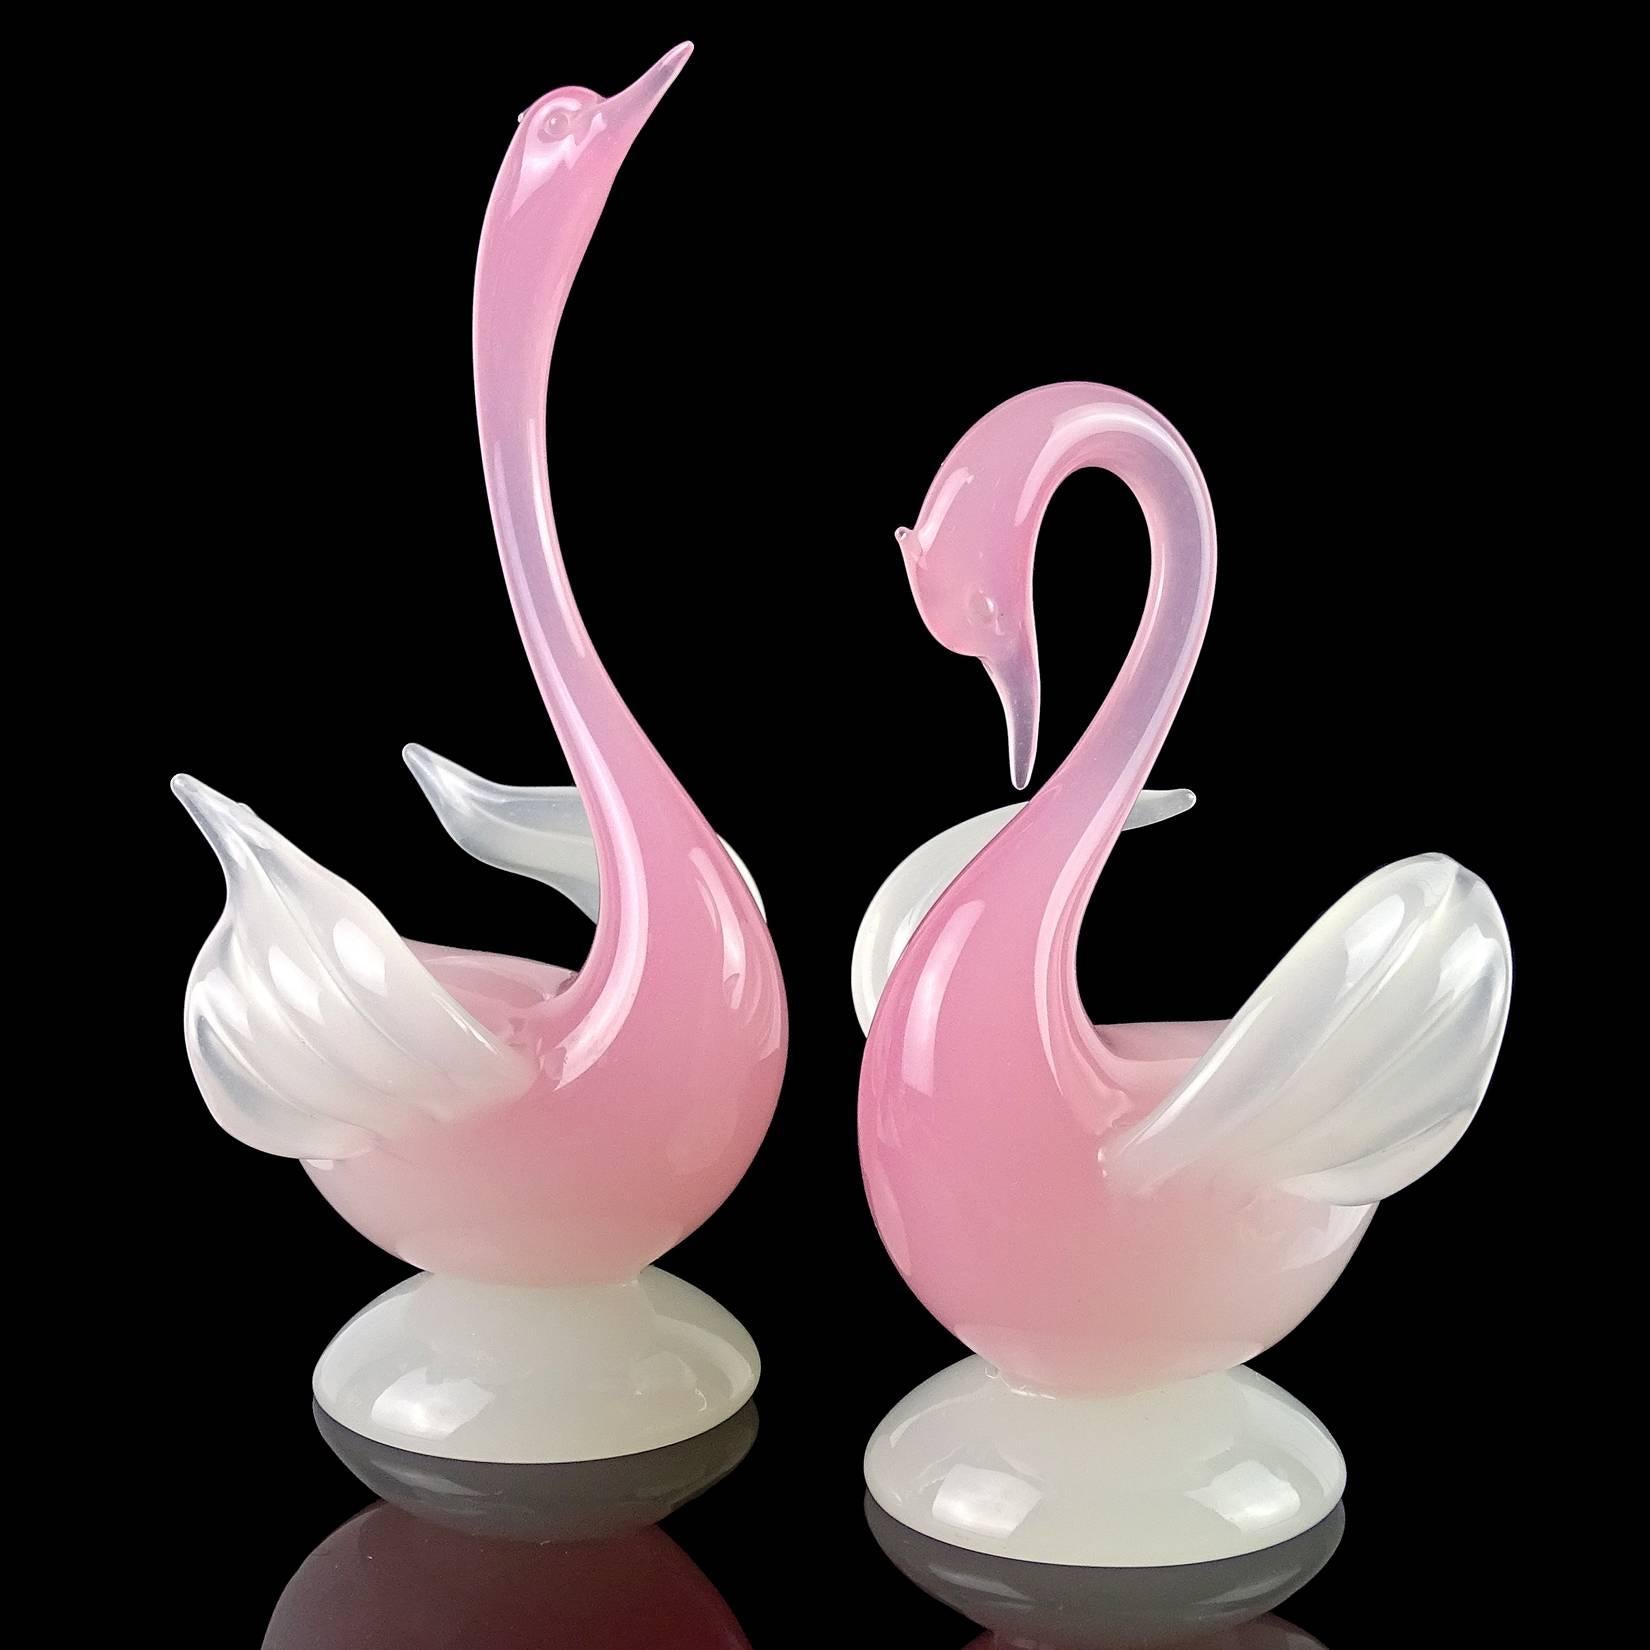 Gorgeous set of vintage Murano hand blown, opalescent pink and white Italian art glass courting swan bird sculptures. Documented to designer Archimede Seguso, from the 